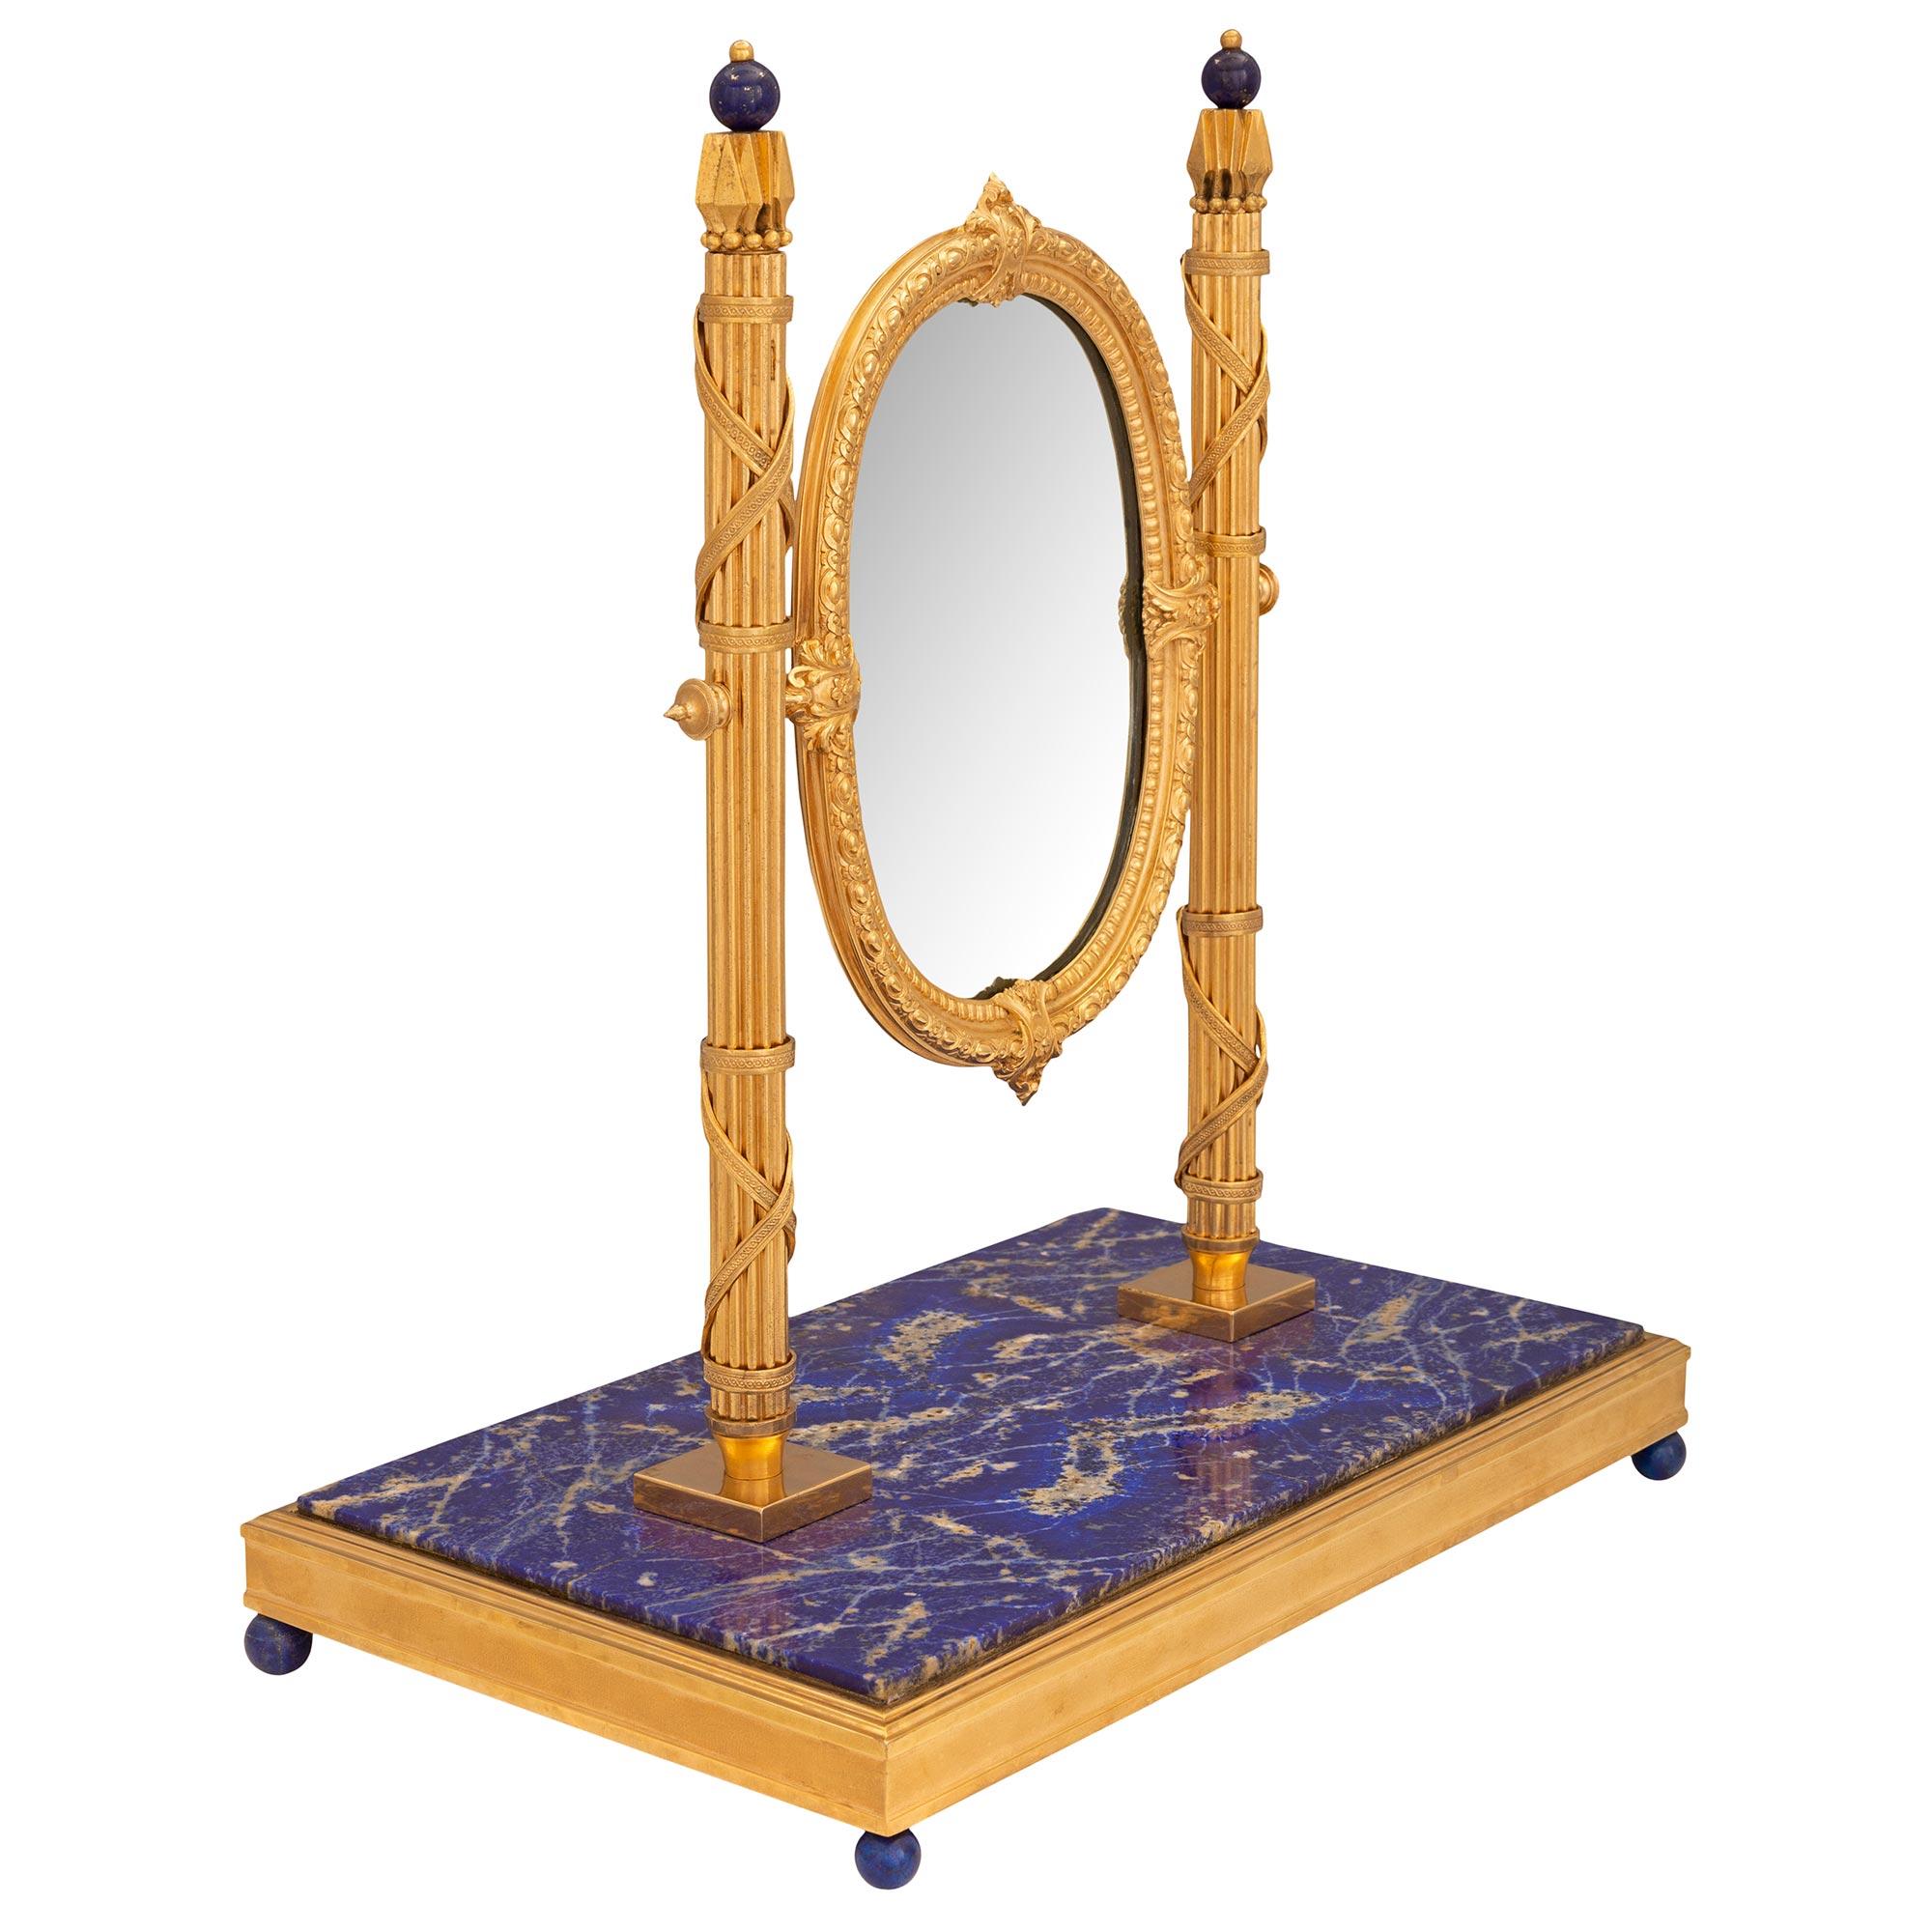 A stunning and very unique French 19th century Louis XVI st. Belle Époque period ormolu and Lapis Lazuli marble vanity mirror. The mirror is raised by elegant and extremely decorative Lapis Lazuli ball feet below the stunning rectangular Lapis